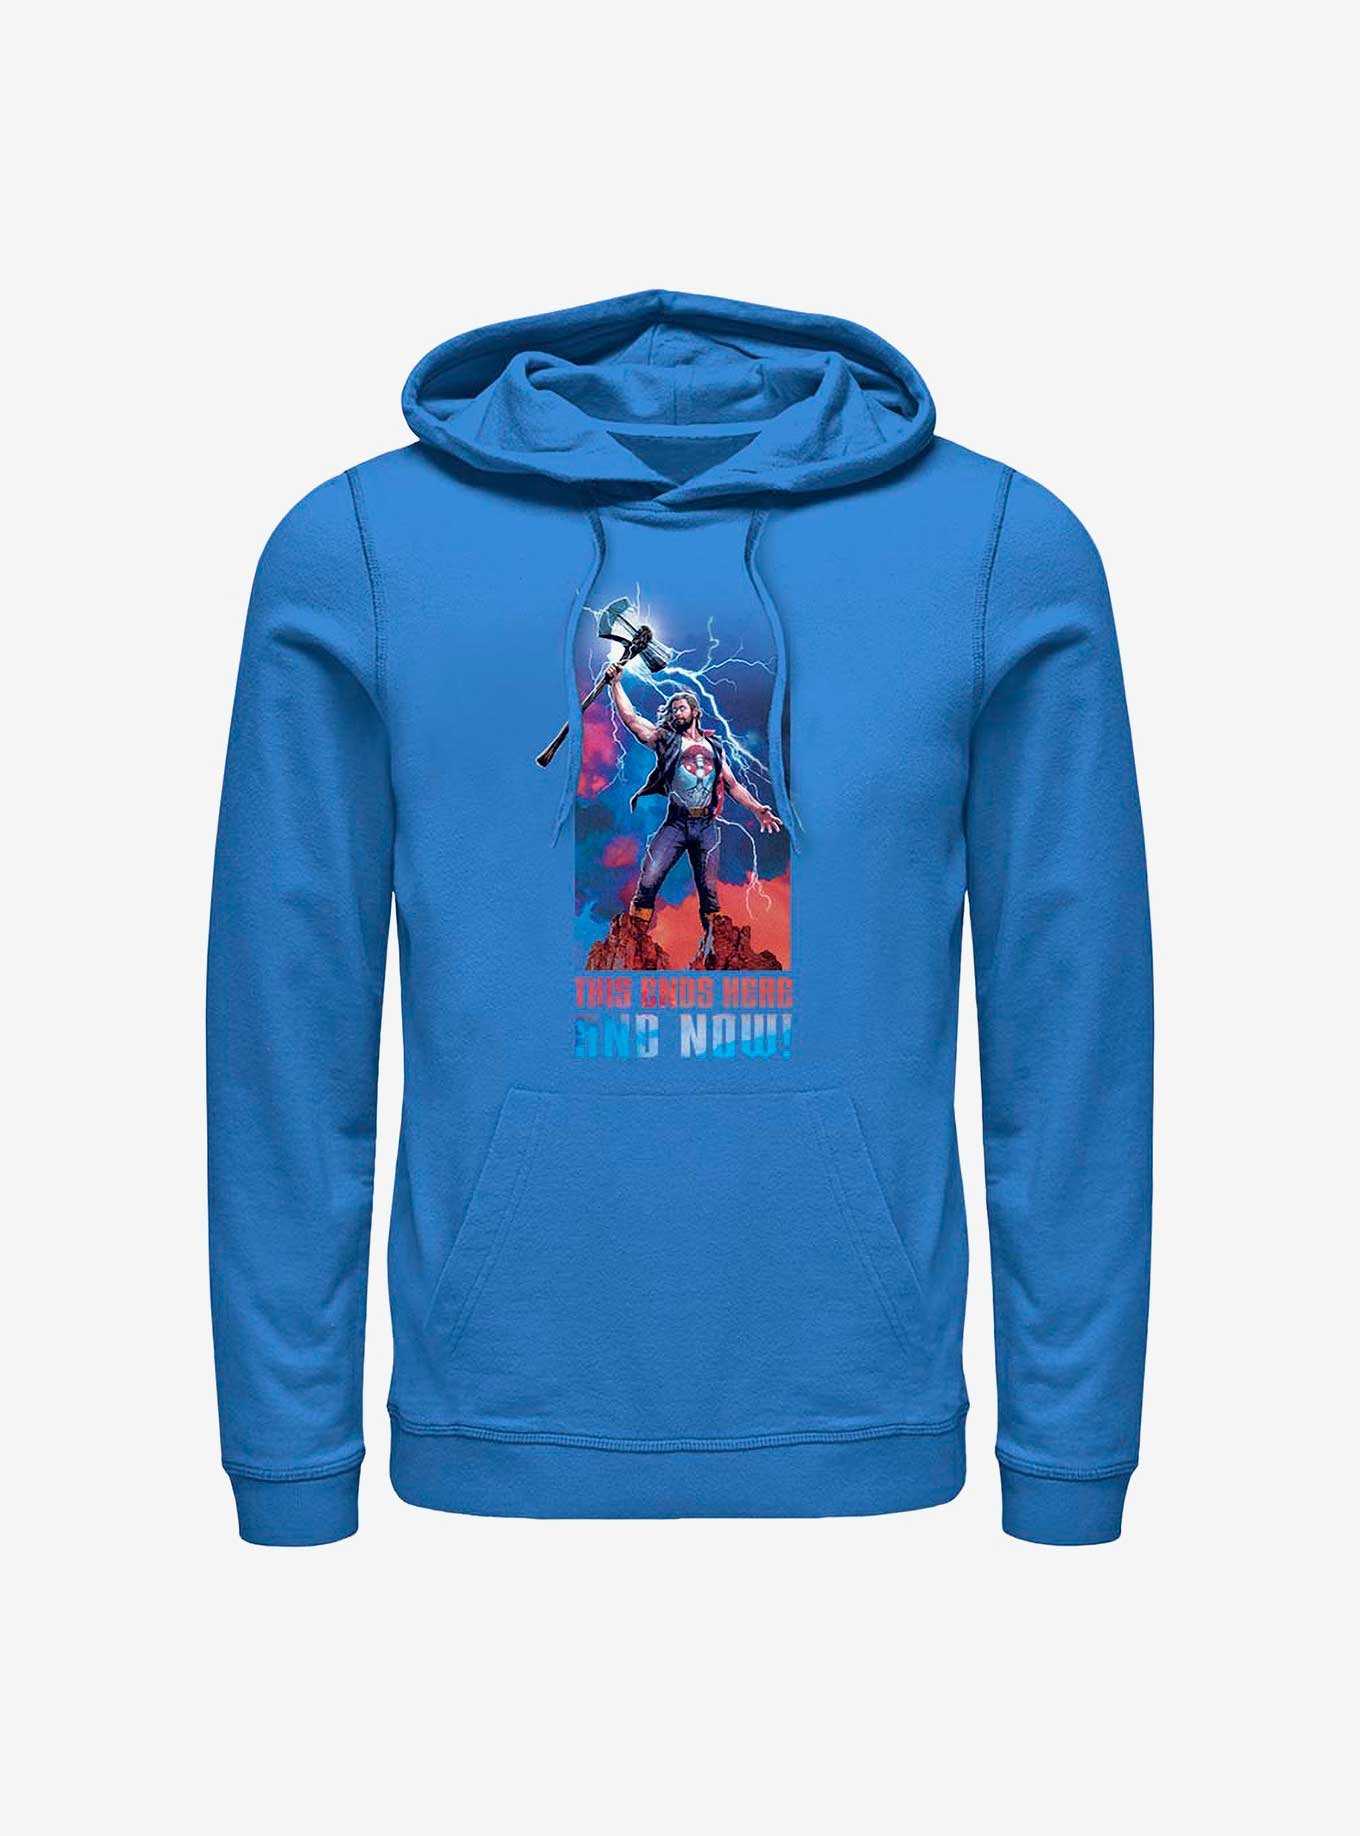 Marvel Thor: Love and Thunder Ends Here and Now Hoodie, , hi-res